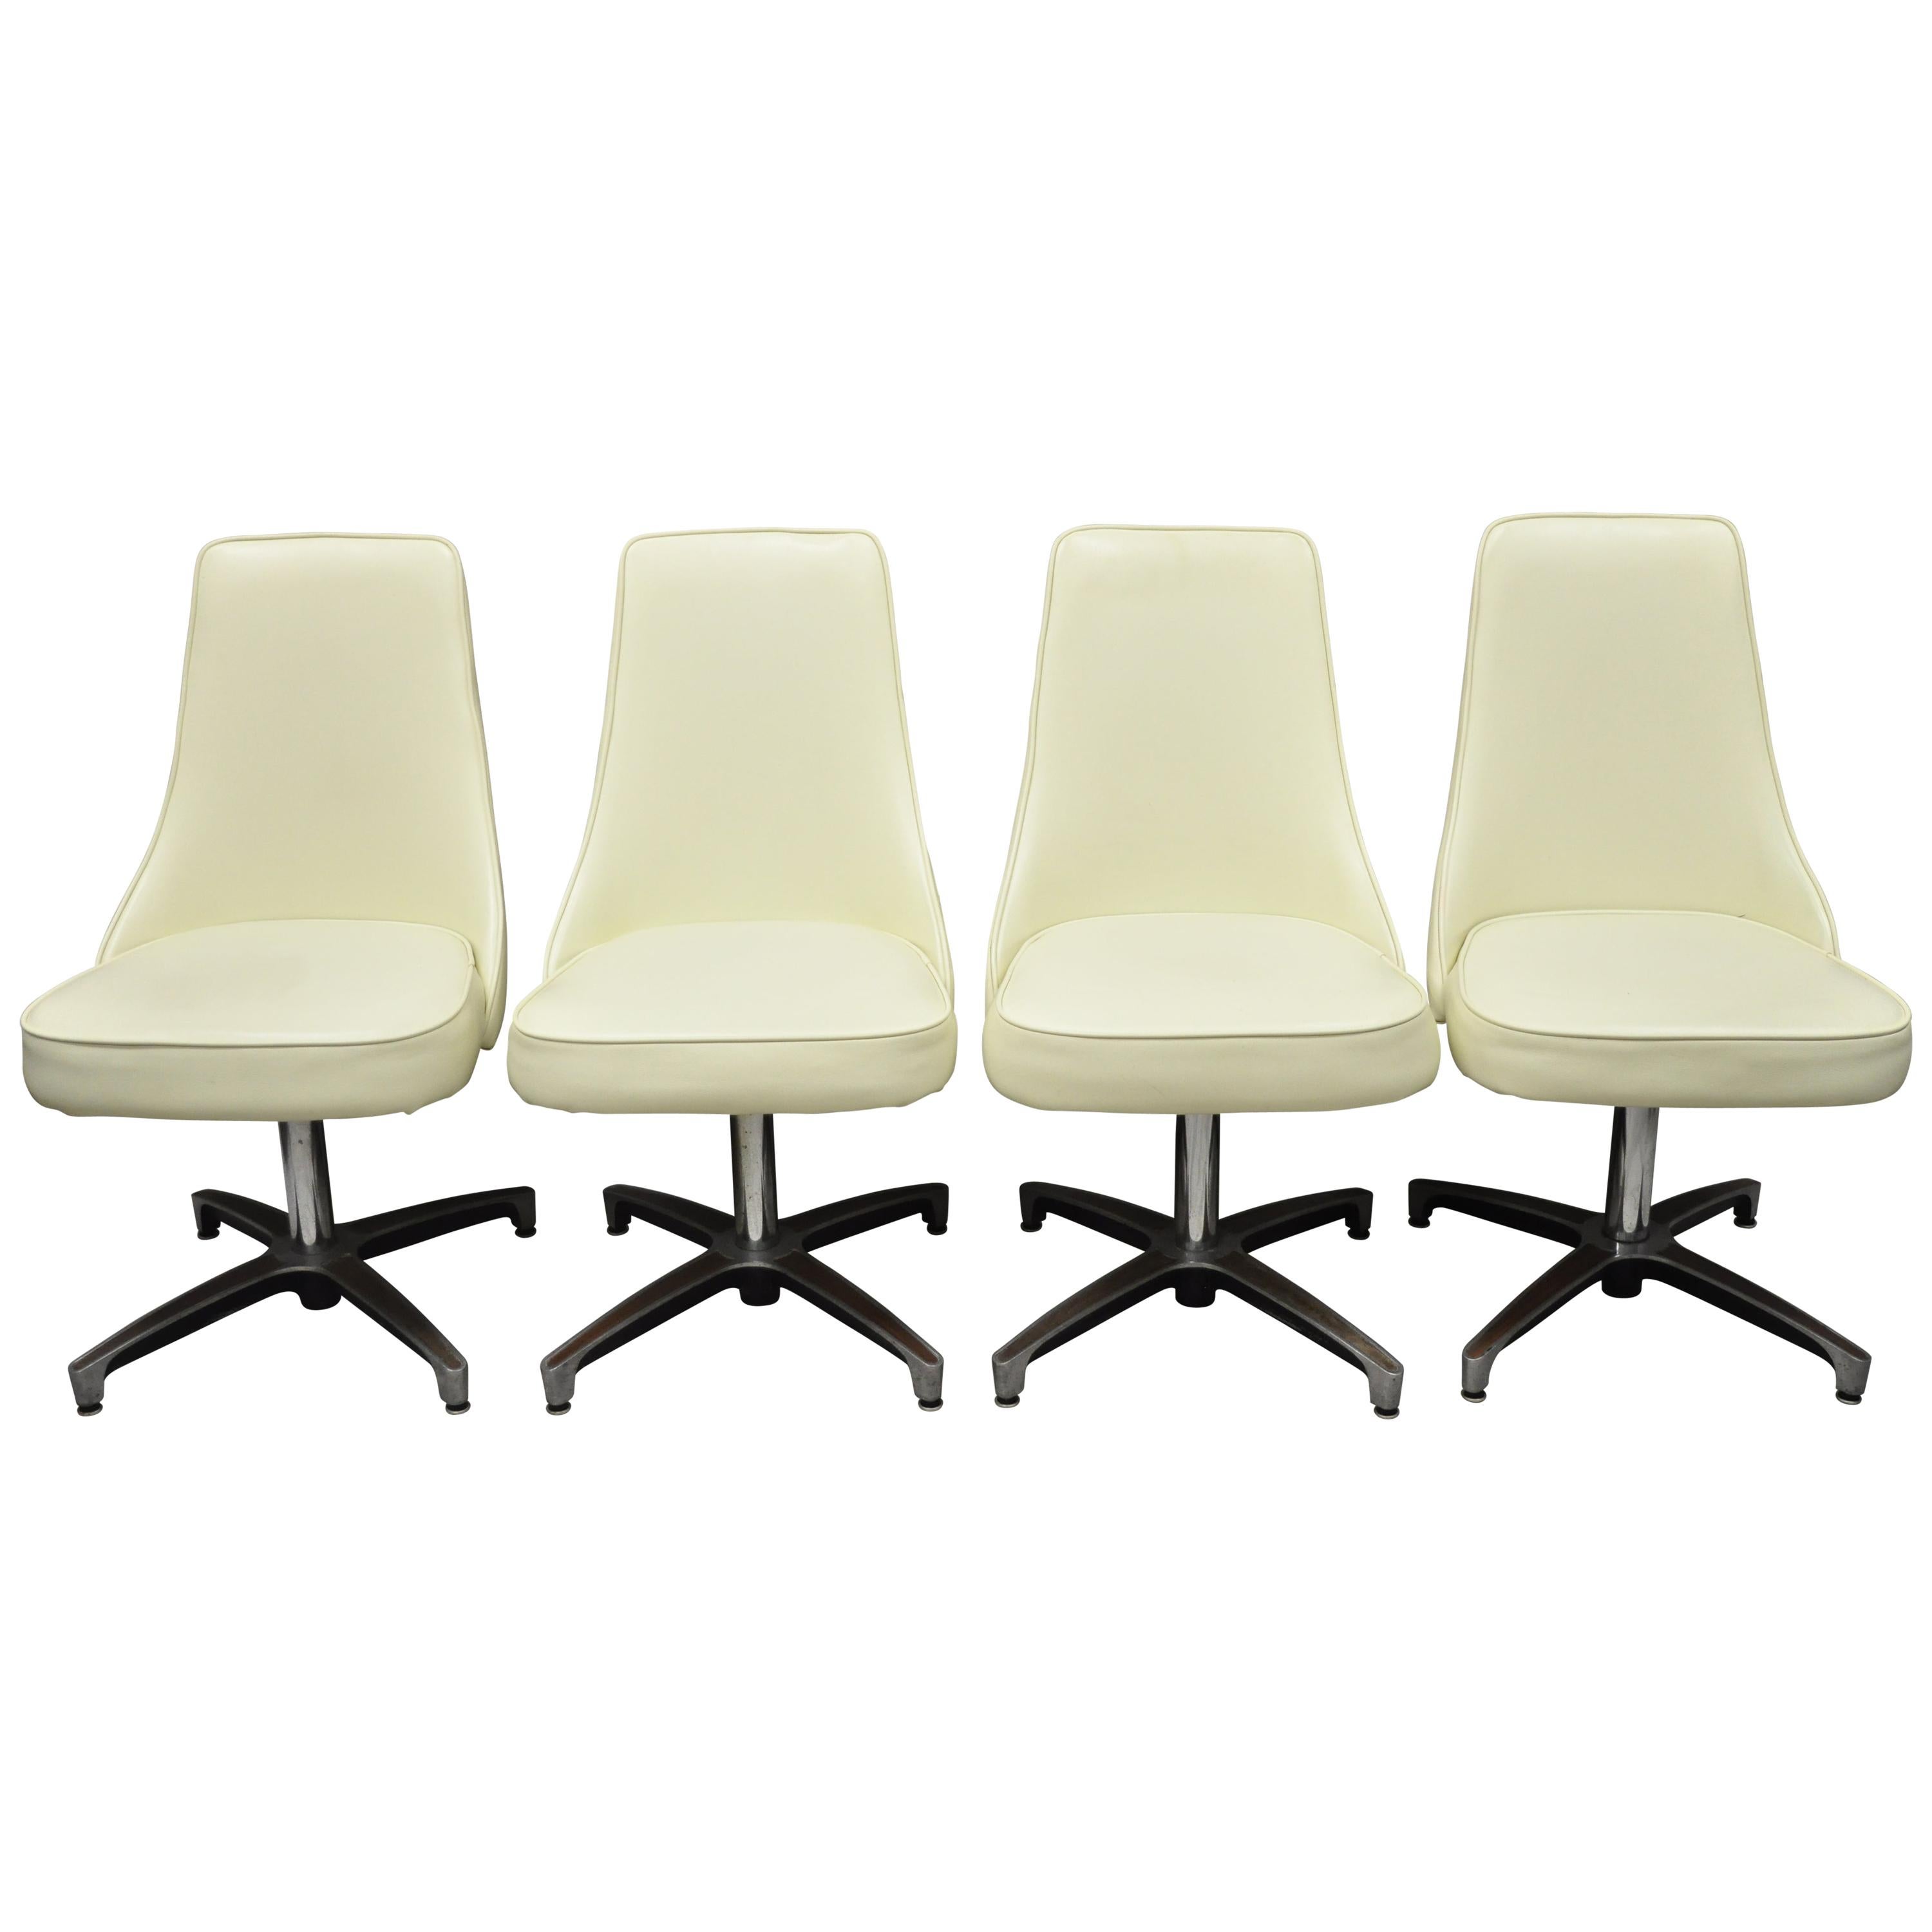 Chromcraft Space Age Midcentury Chrome Swivel White Dining Chairs, Set of 4